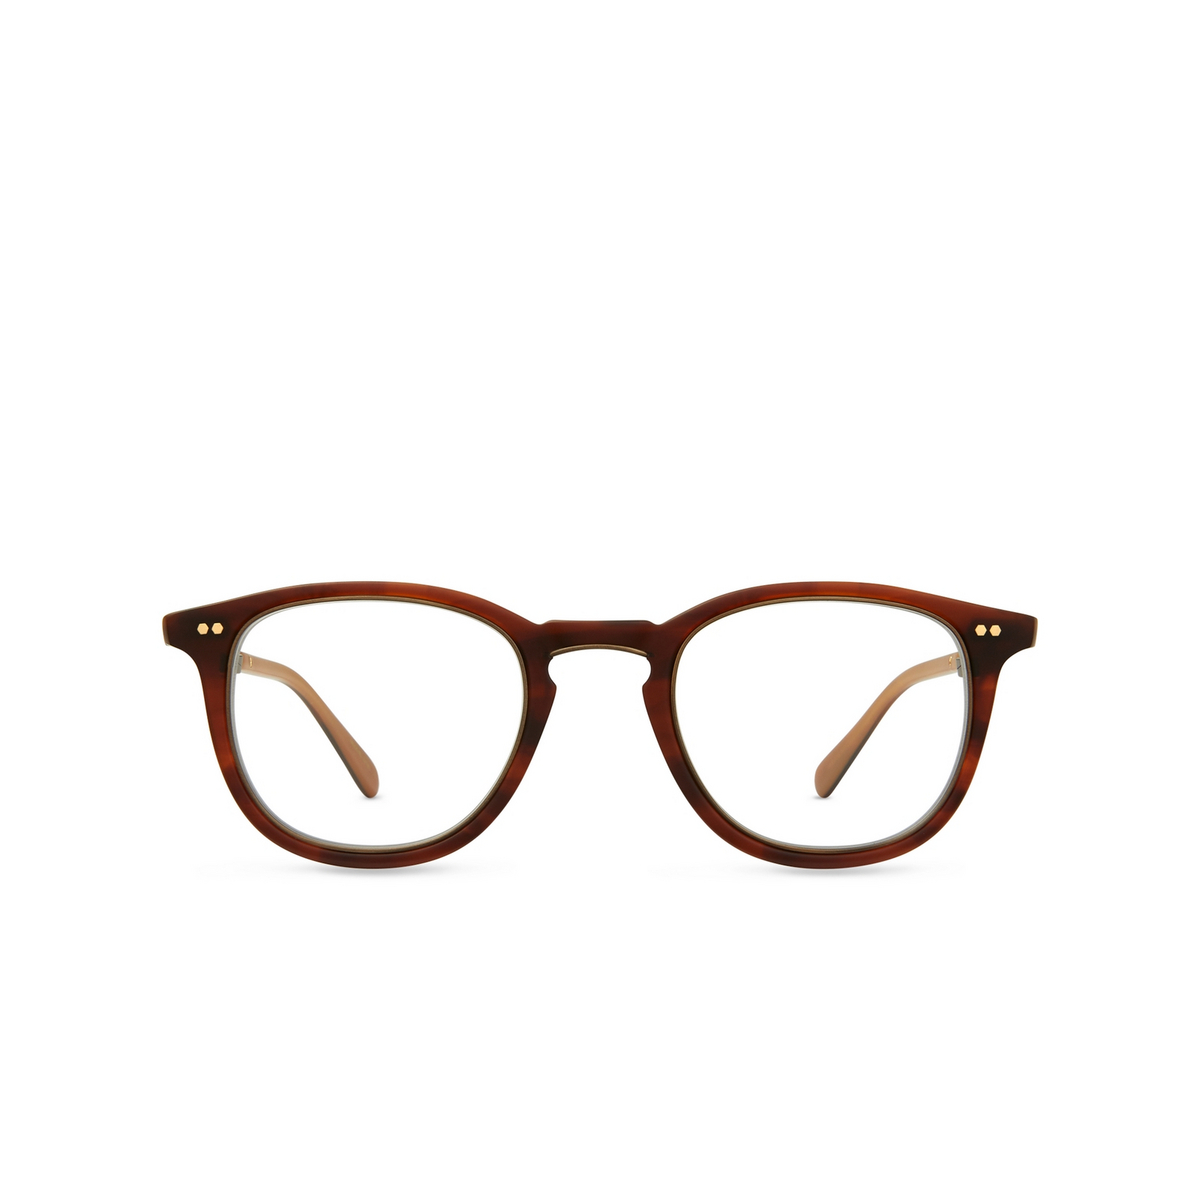 Mr. Leight COOPERS C Eyeglasses MHLA-ATG Matte Honey Laminate-Antique Gold - front view